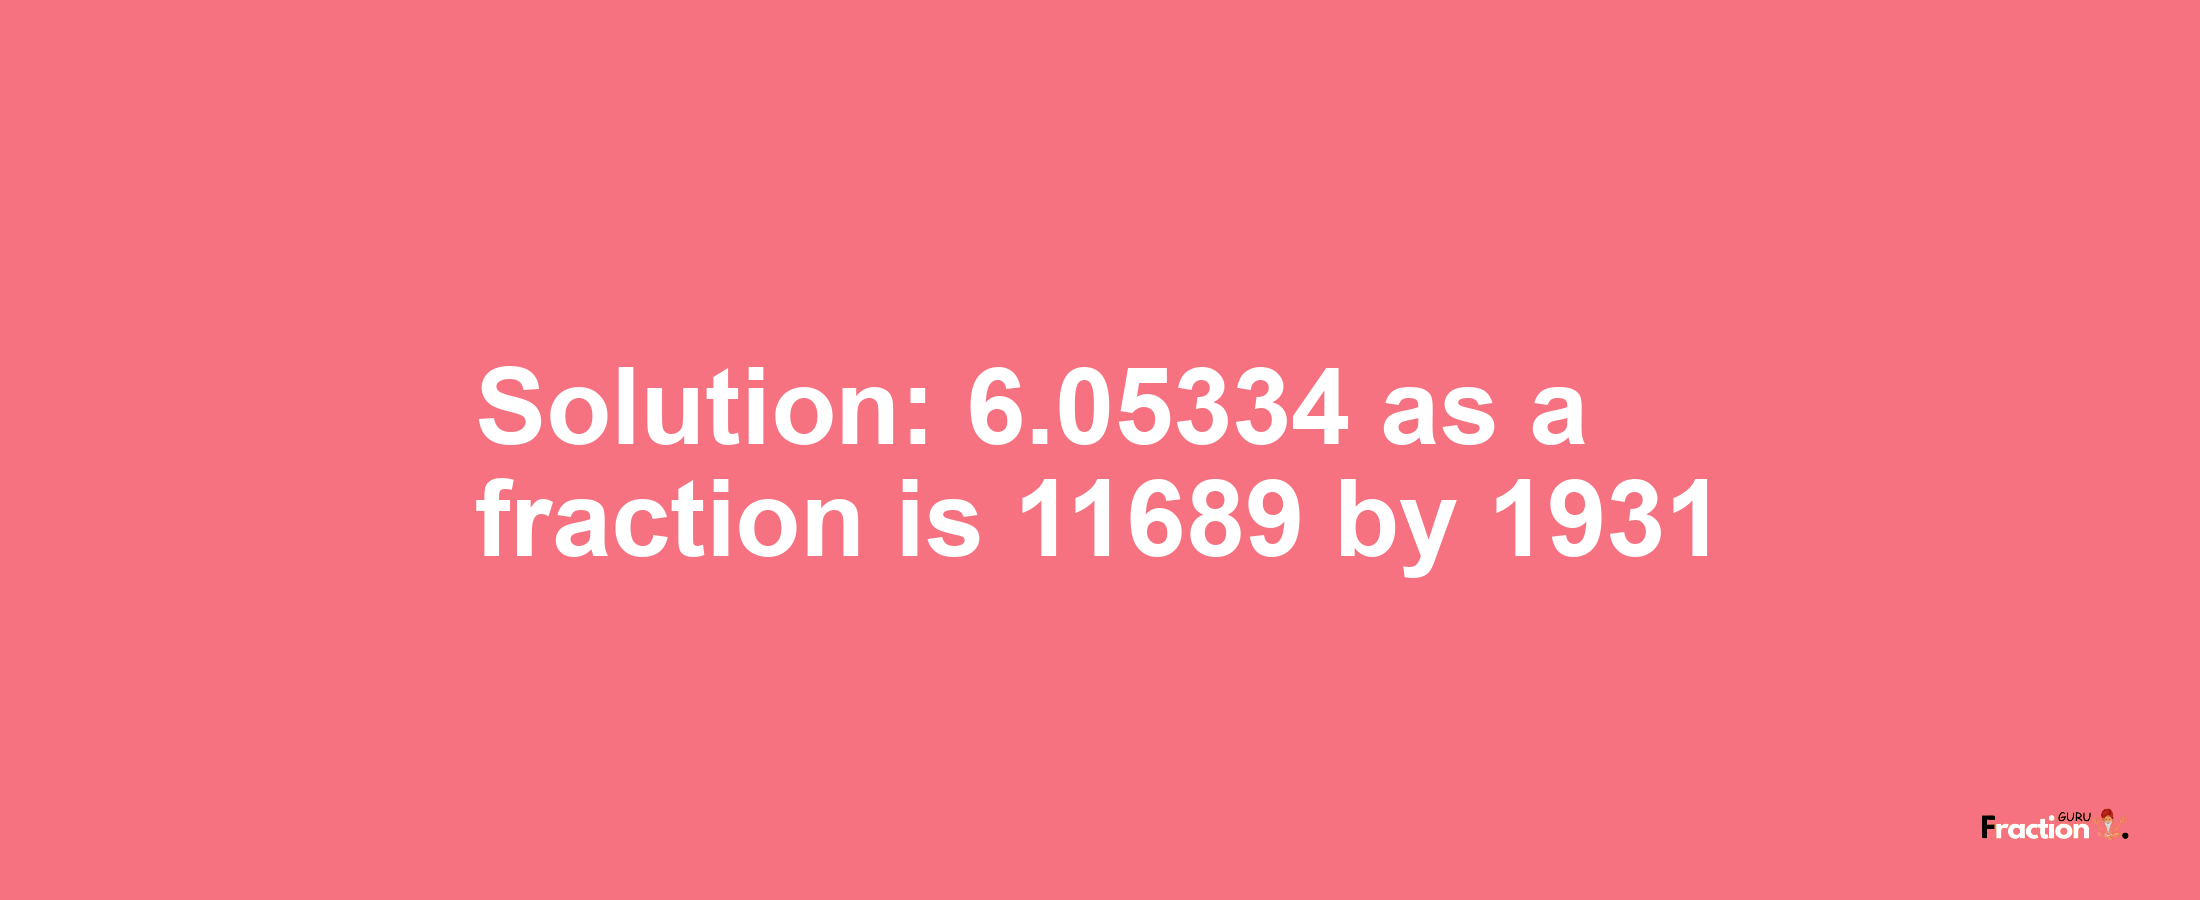 Solution:6.05334 as a fraction is 11689/1931